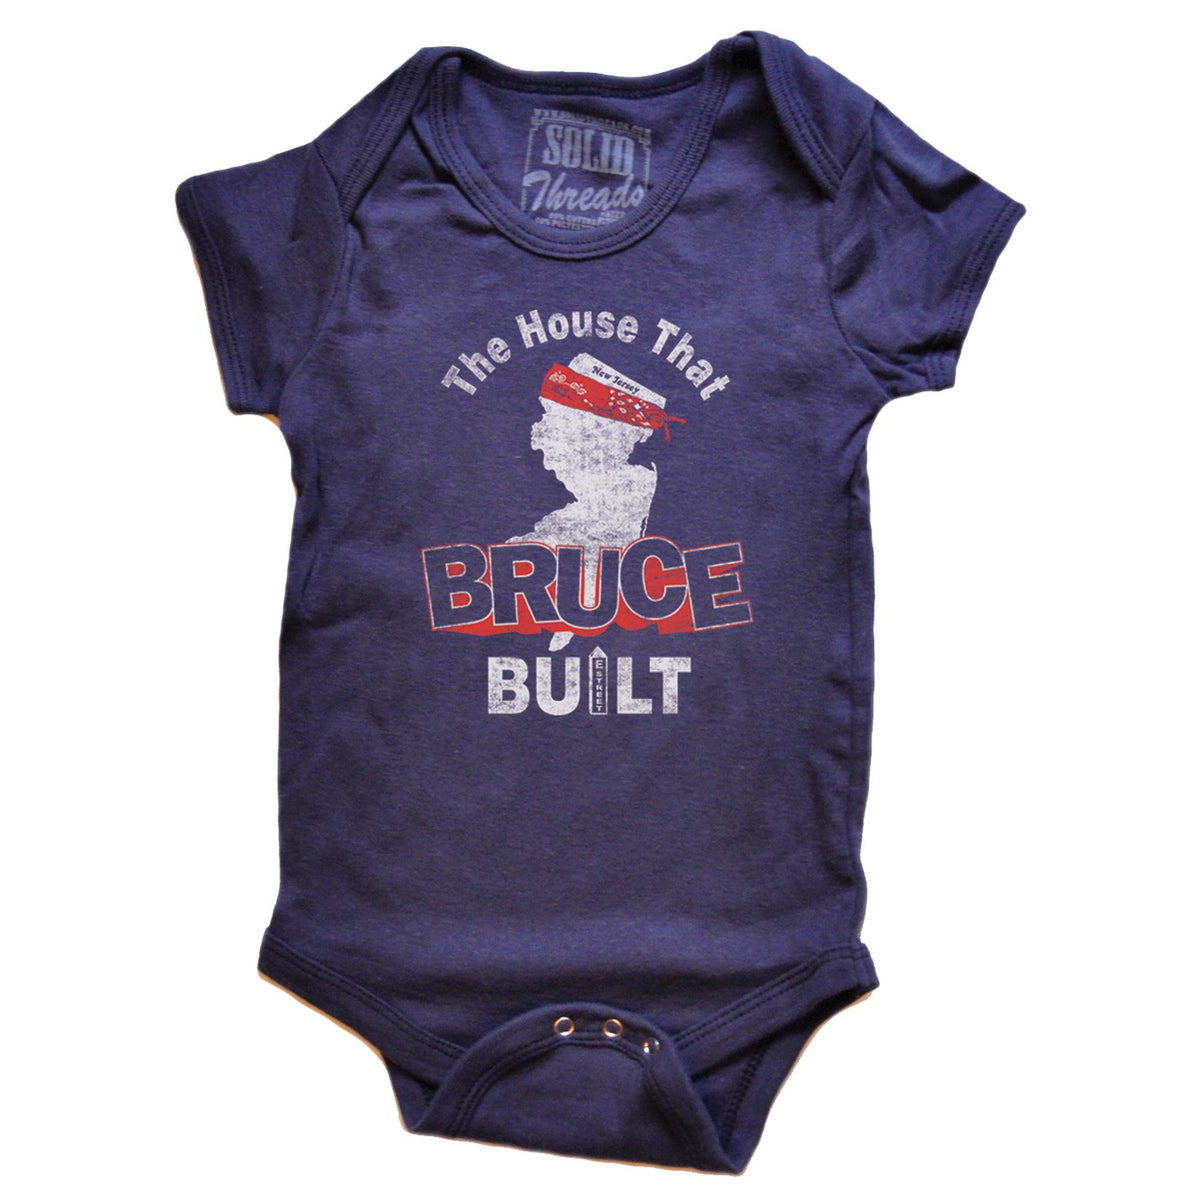 Cute Baby The House That Bruce Built Retro One Piece | Funny New Jersey Baby Romper | SOLID THREADS